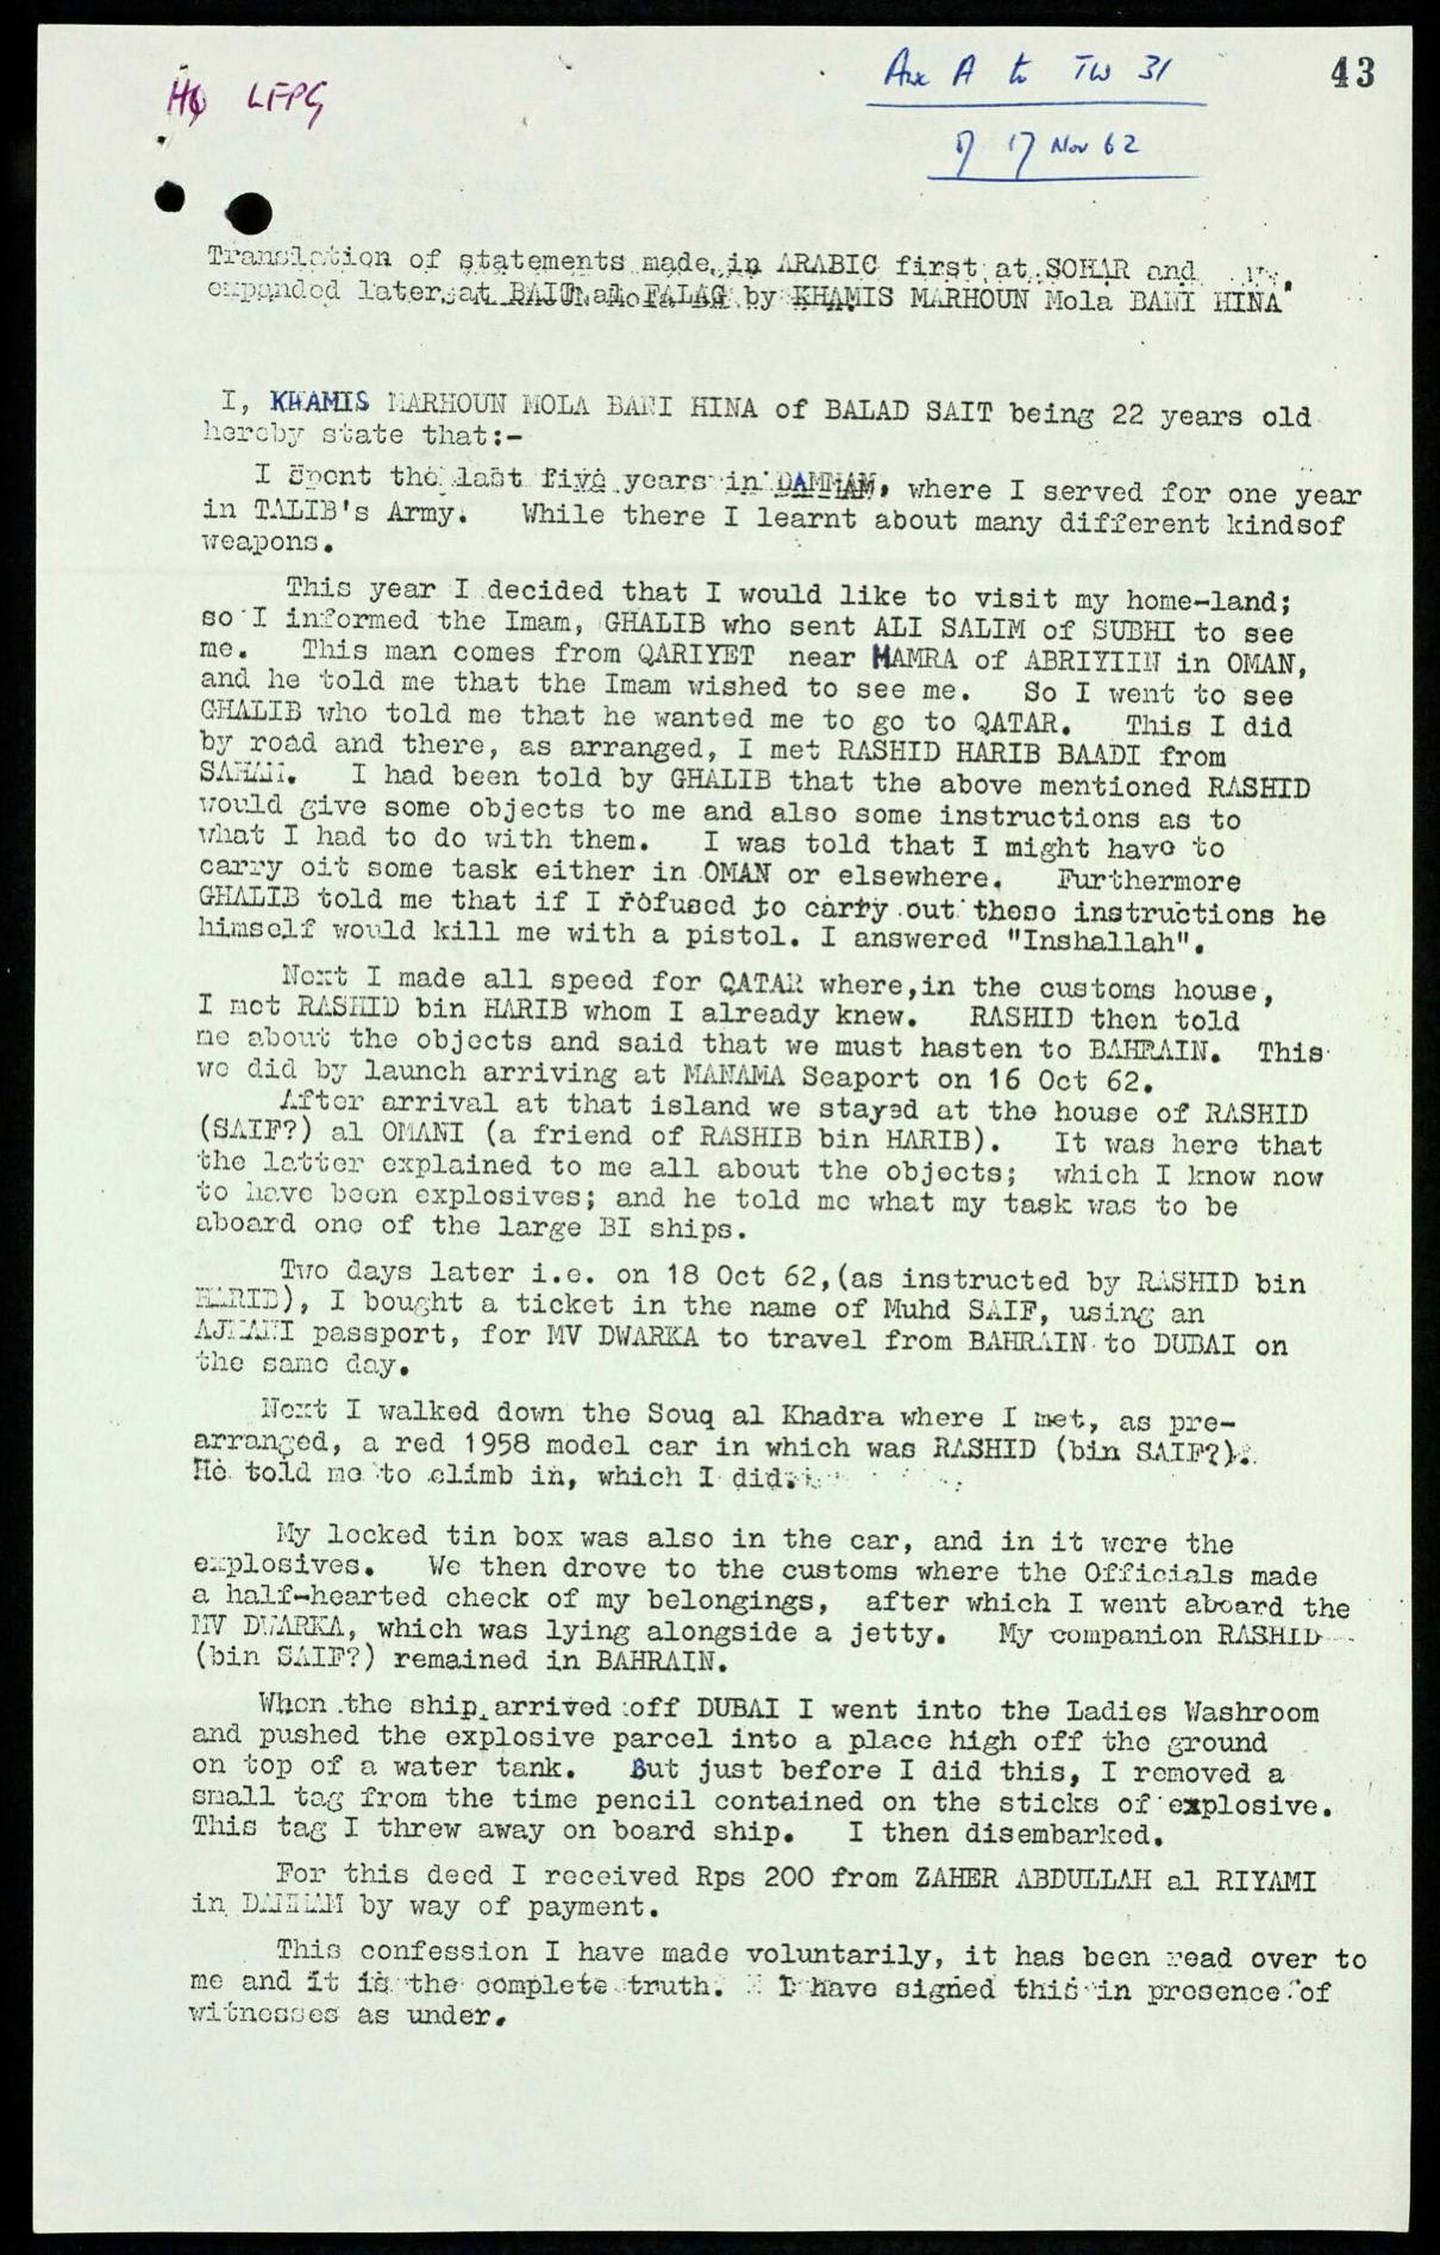 The English translation of the confession of Khamis bin Markhoun Mola Beni Hiria to the bombing of the SS Dwarka in 1962. His arrest and likely execution in Oman saw the end of terrorist attacks on ships in the Arabian Gulf. UK National Archives